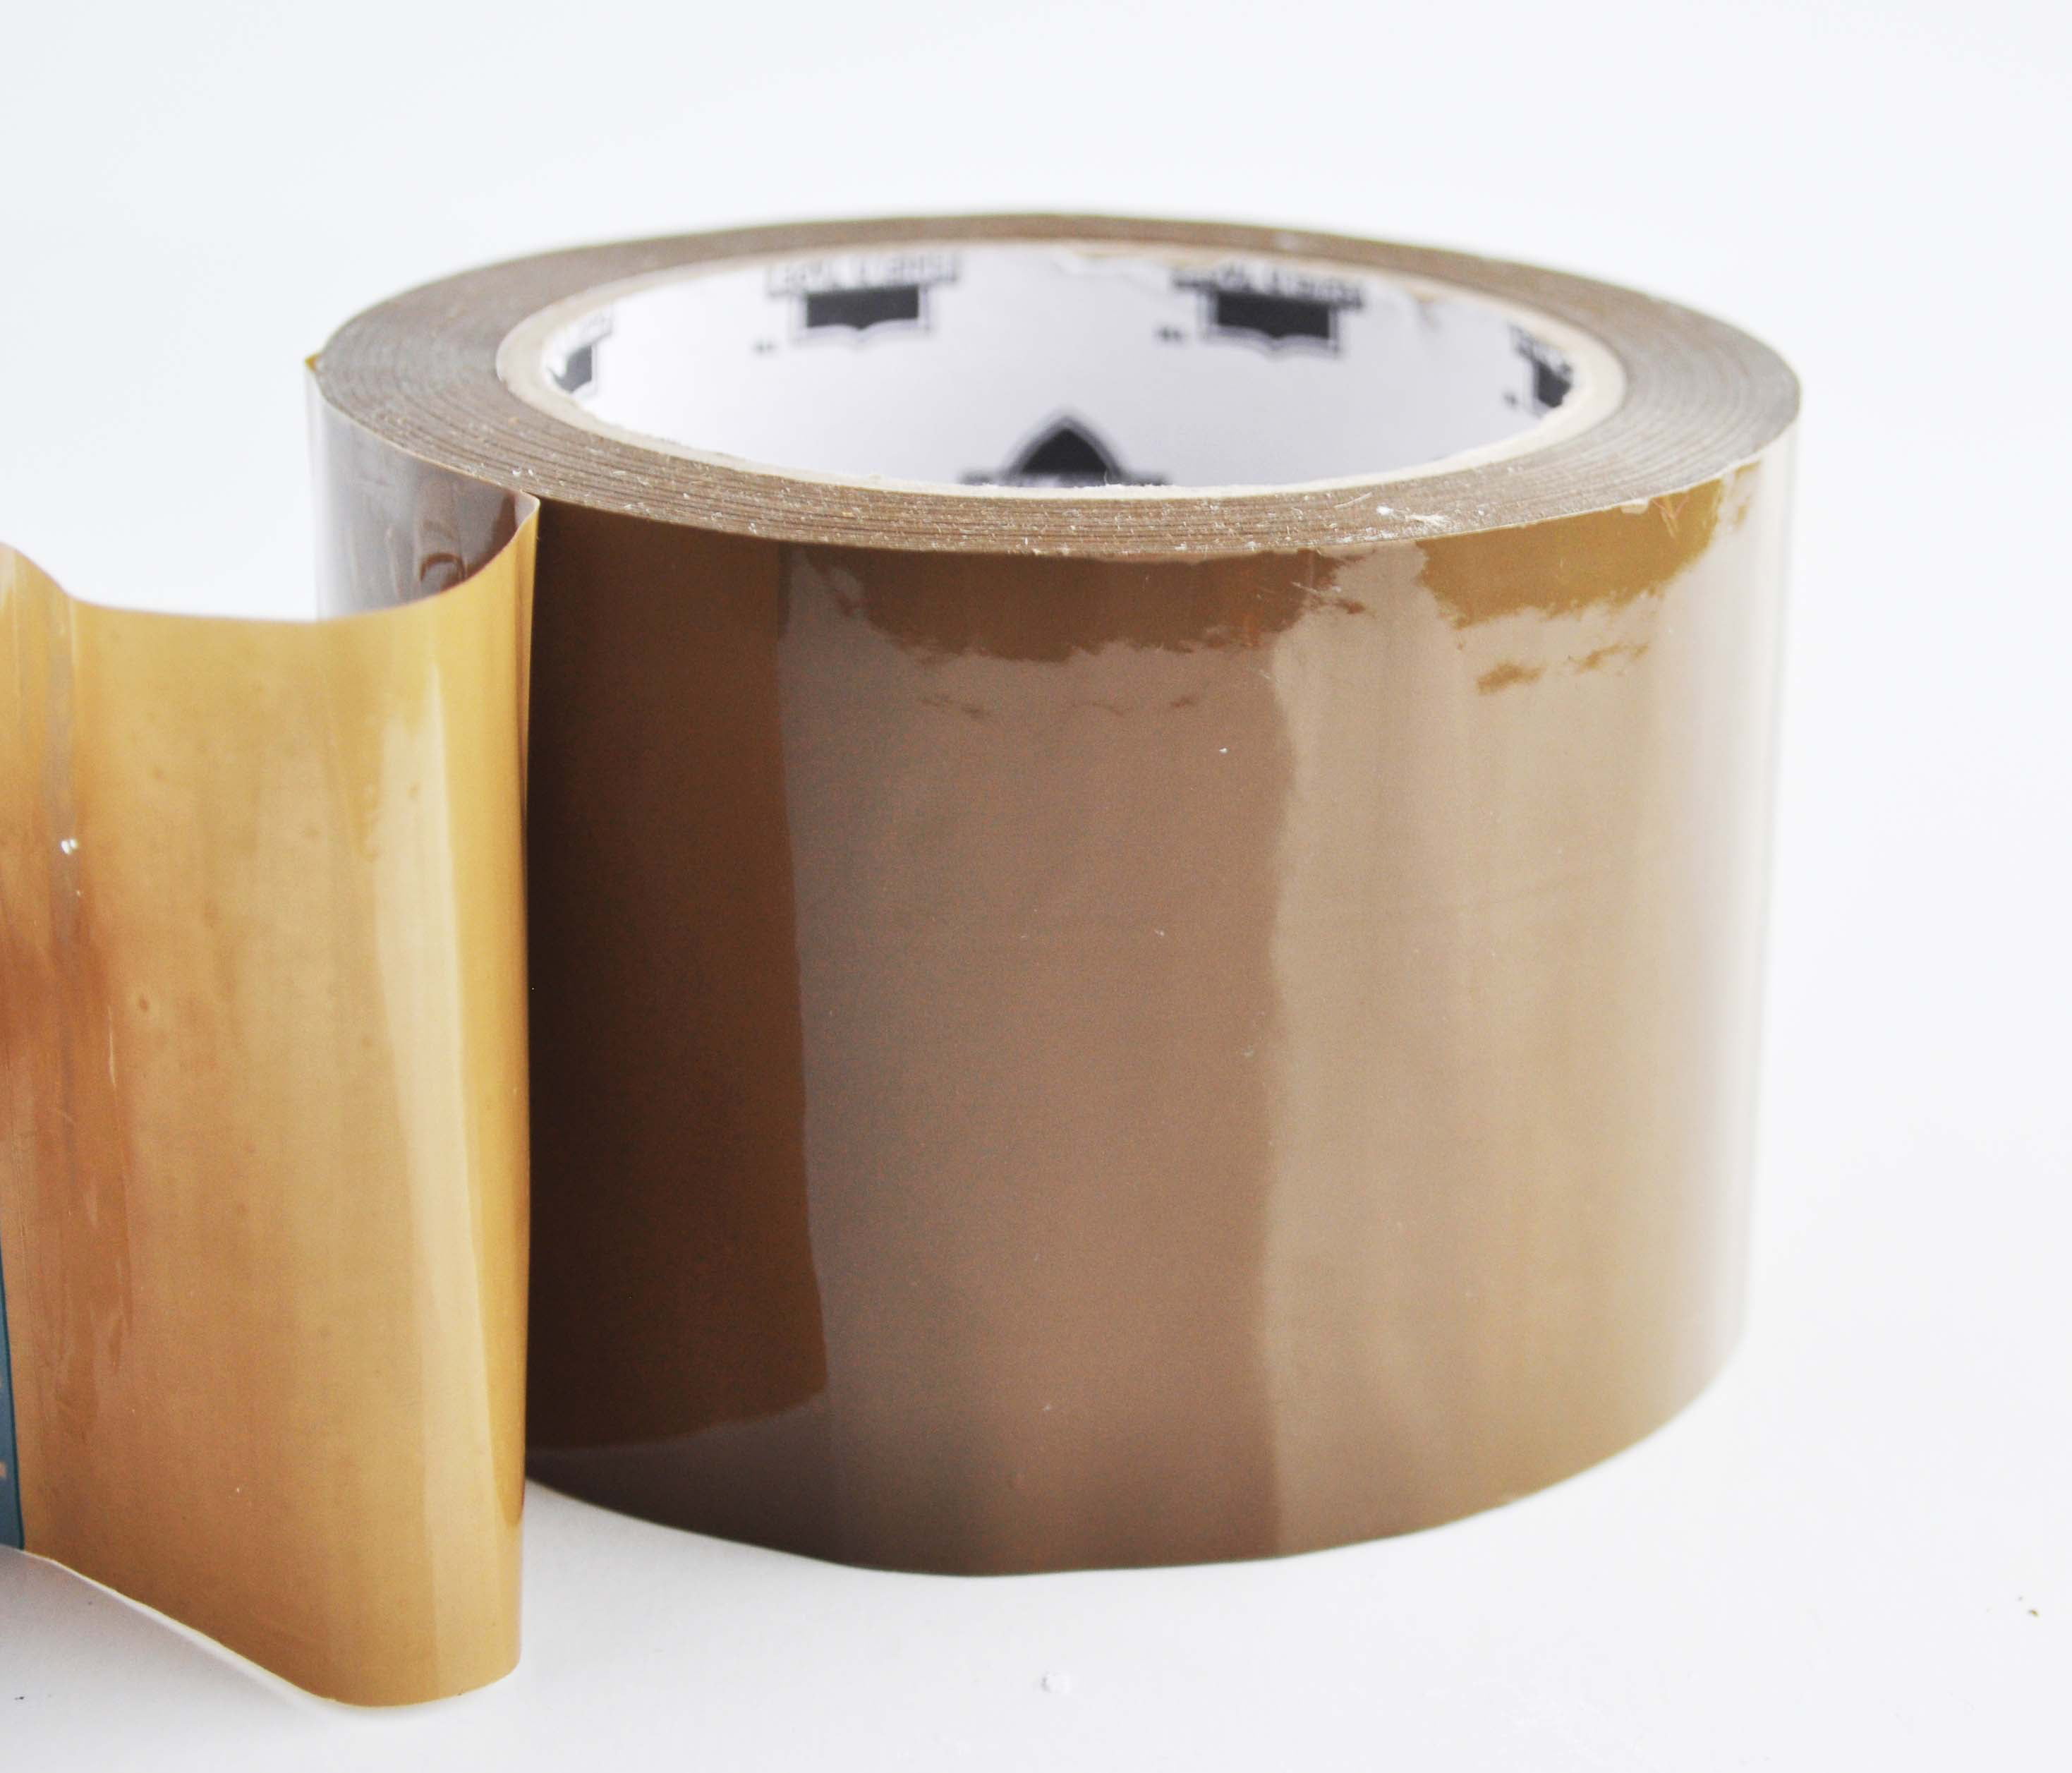 Hot Melt Packing Adhesive Tape 2.0 Mil Box Shipping Tapes 2" x 110 Yds 12 Rolls